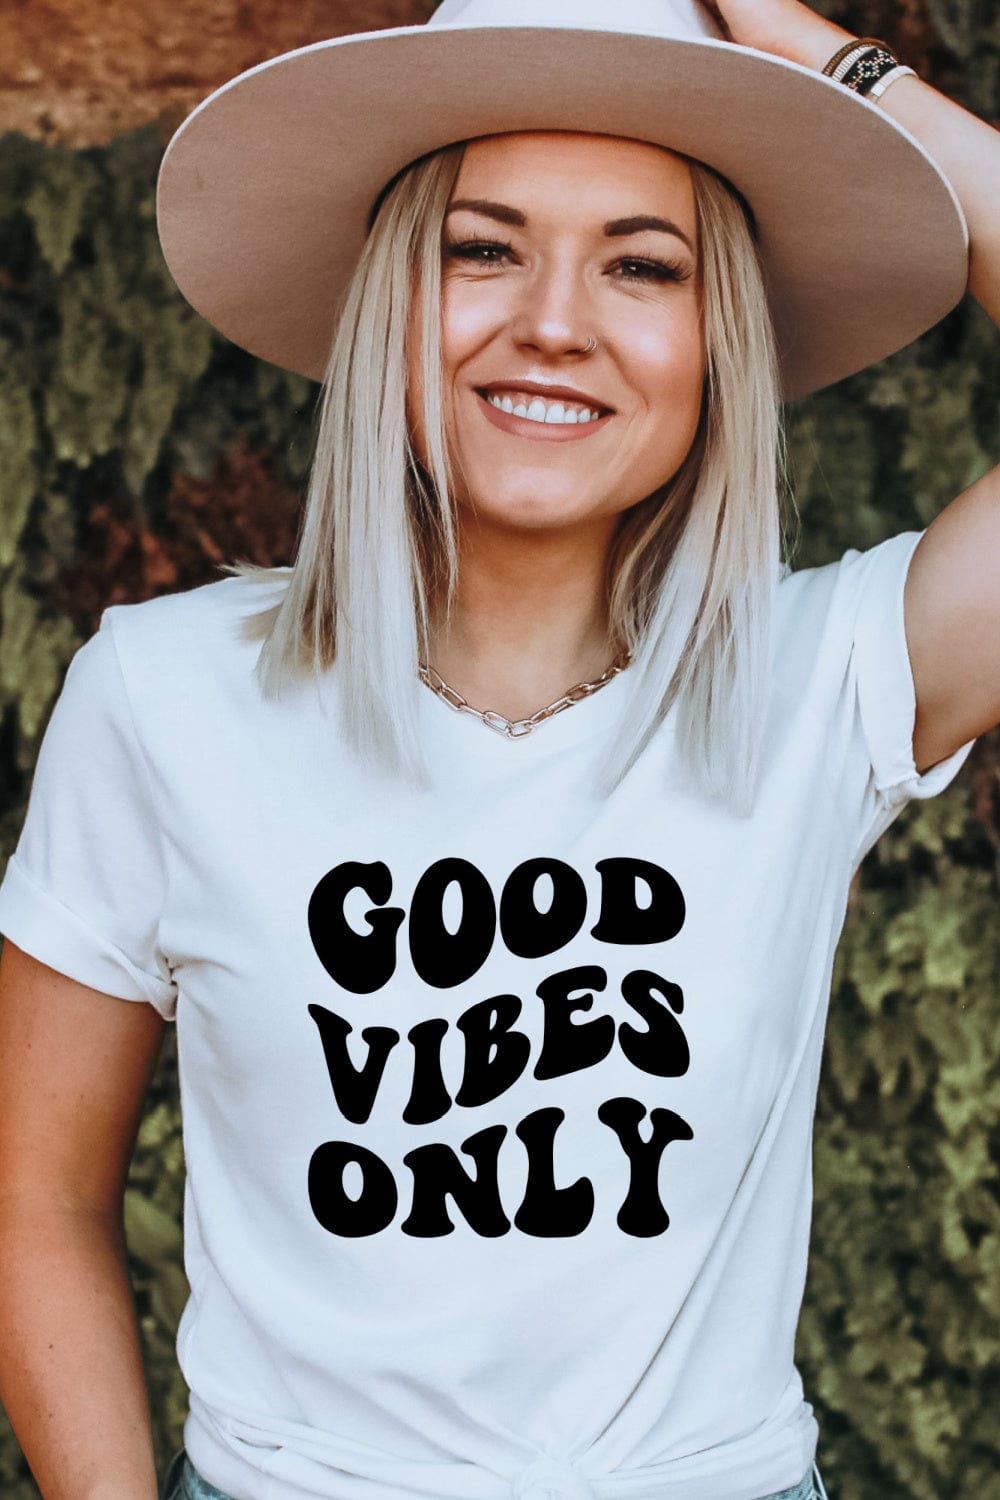 T-Shirt White / S Good Vibes Only Graphic Tee